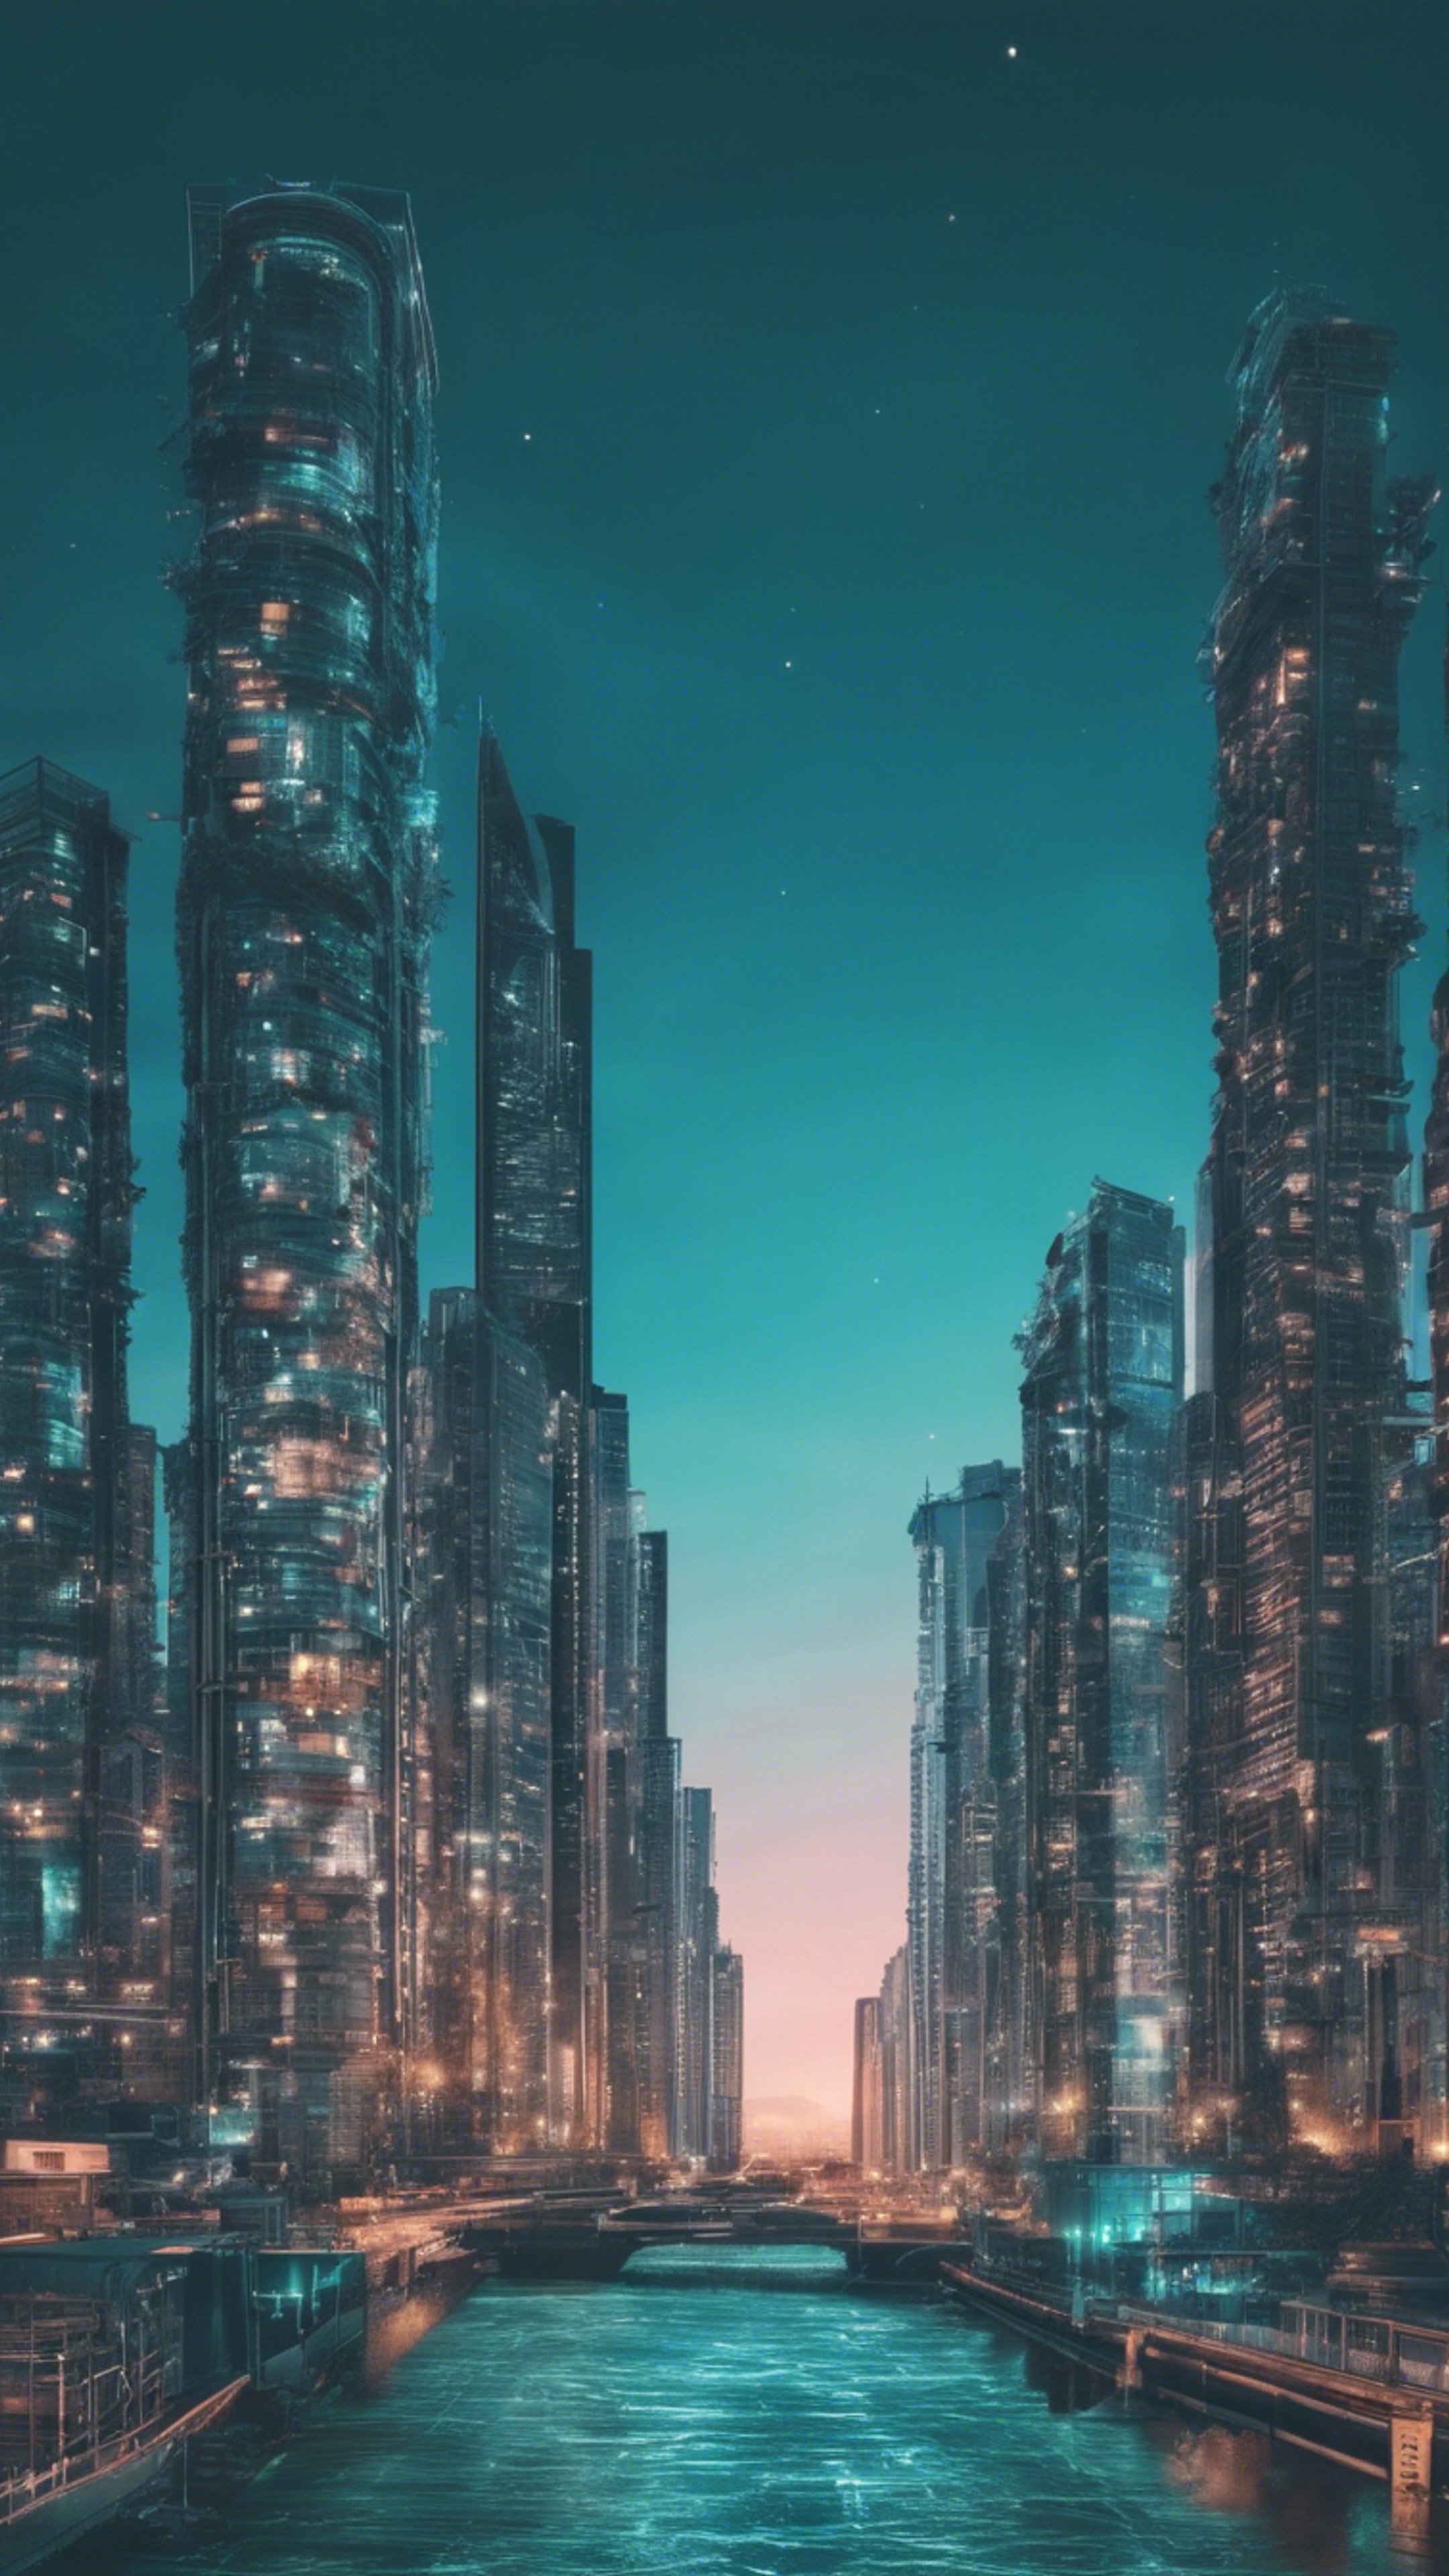 A contemporary cityscape under the twilight sky casting cool teal hue. Wallpaper[44491a7bcb2b4189ab7f]